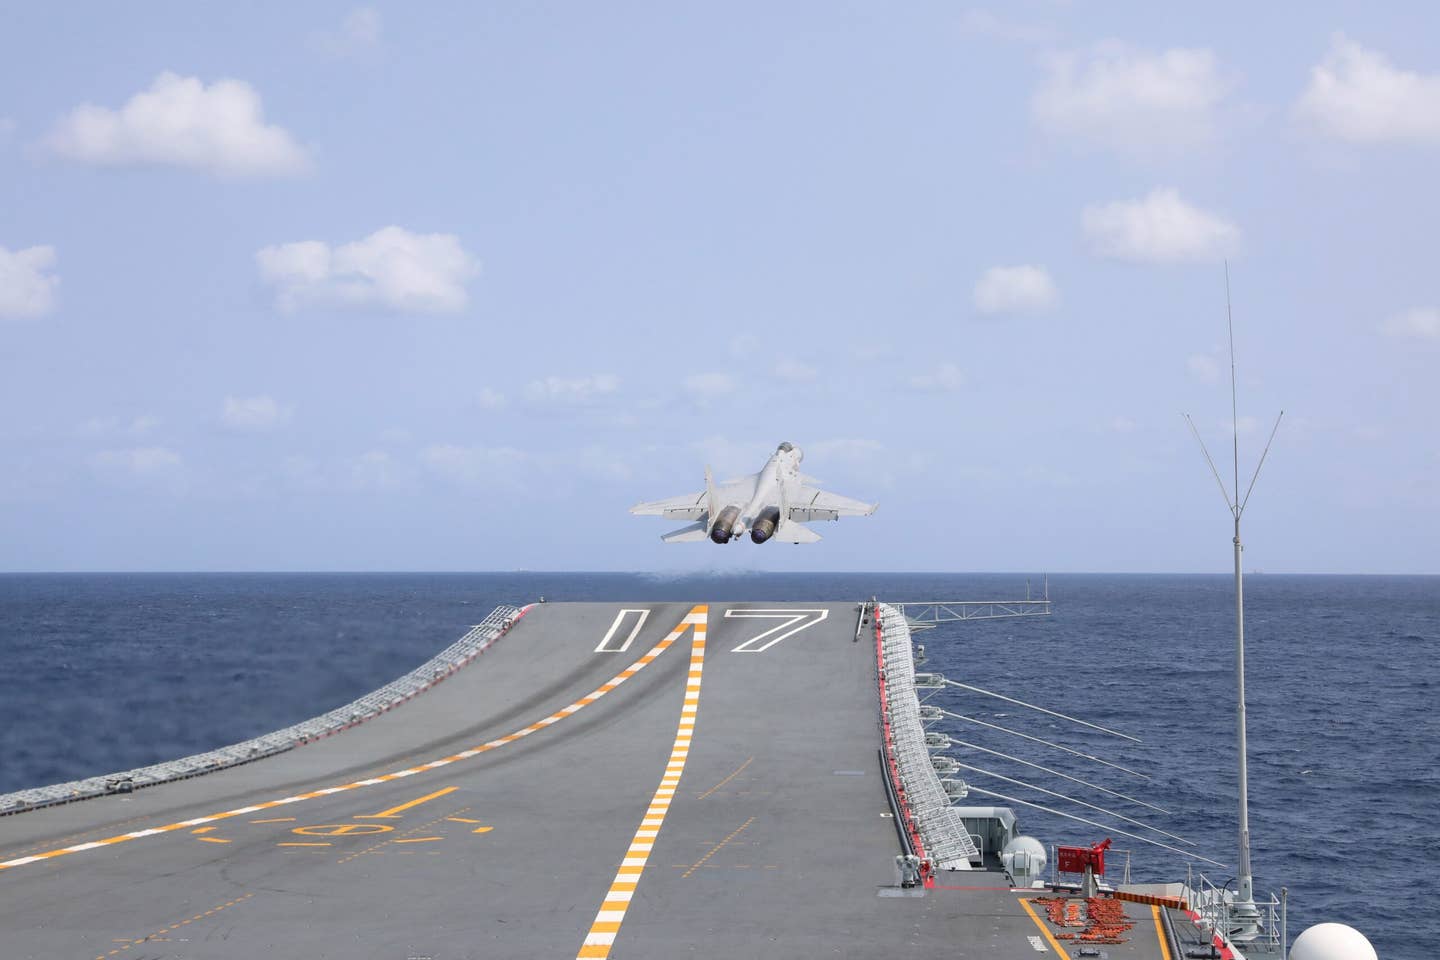 A J-15 takes off from the ski jump ramp on the aircraft carrier <em>Shandong</em> during military exercises around Taiwan in April 2023. <em>Photo by An Ni/Xinhua via Getty Images</em>